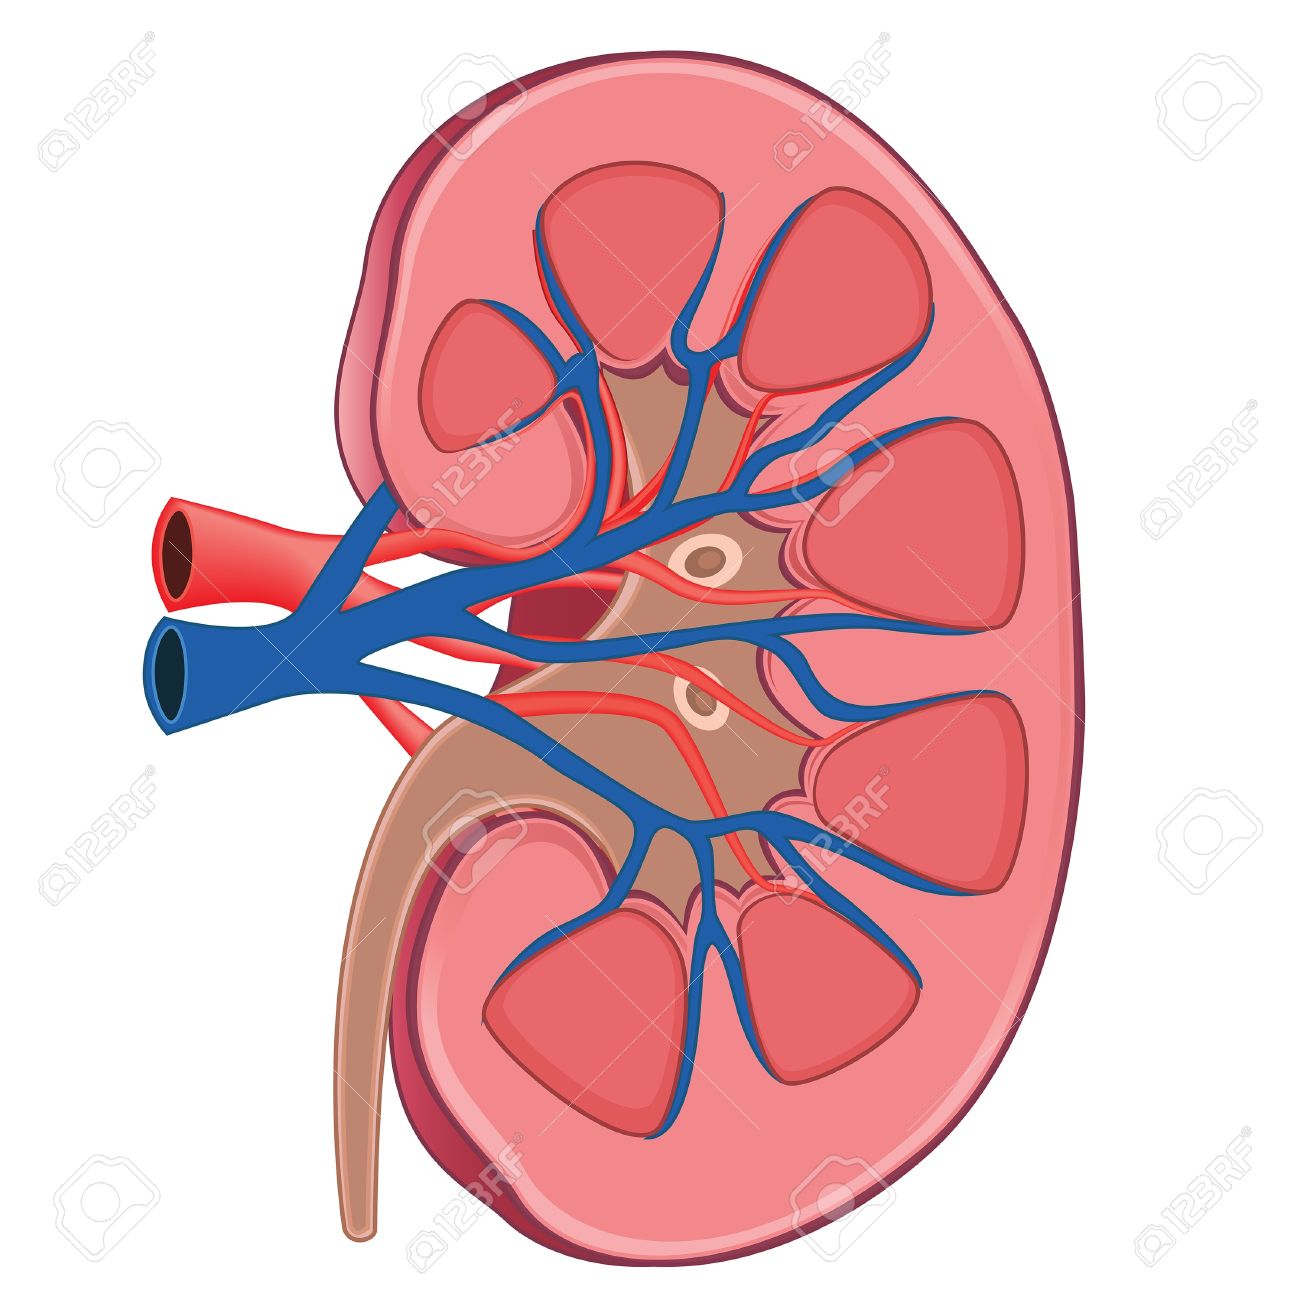 Kidney clipart 9 » Clipart Station.